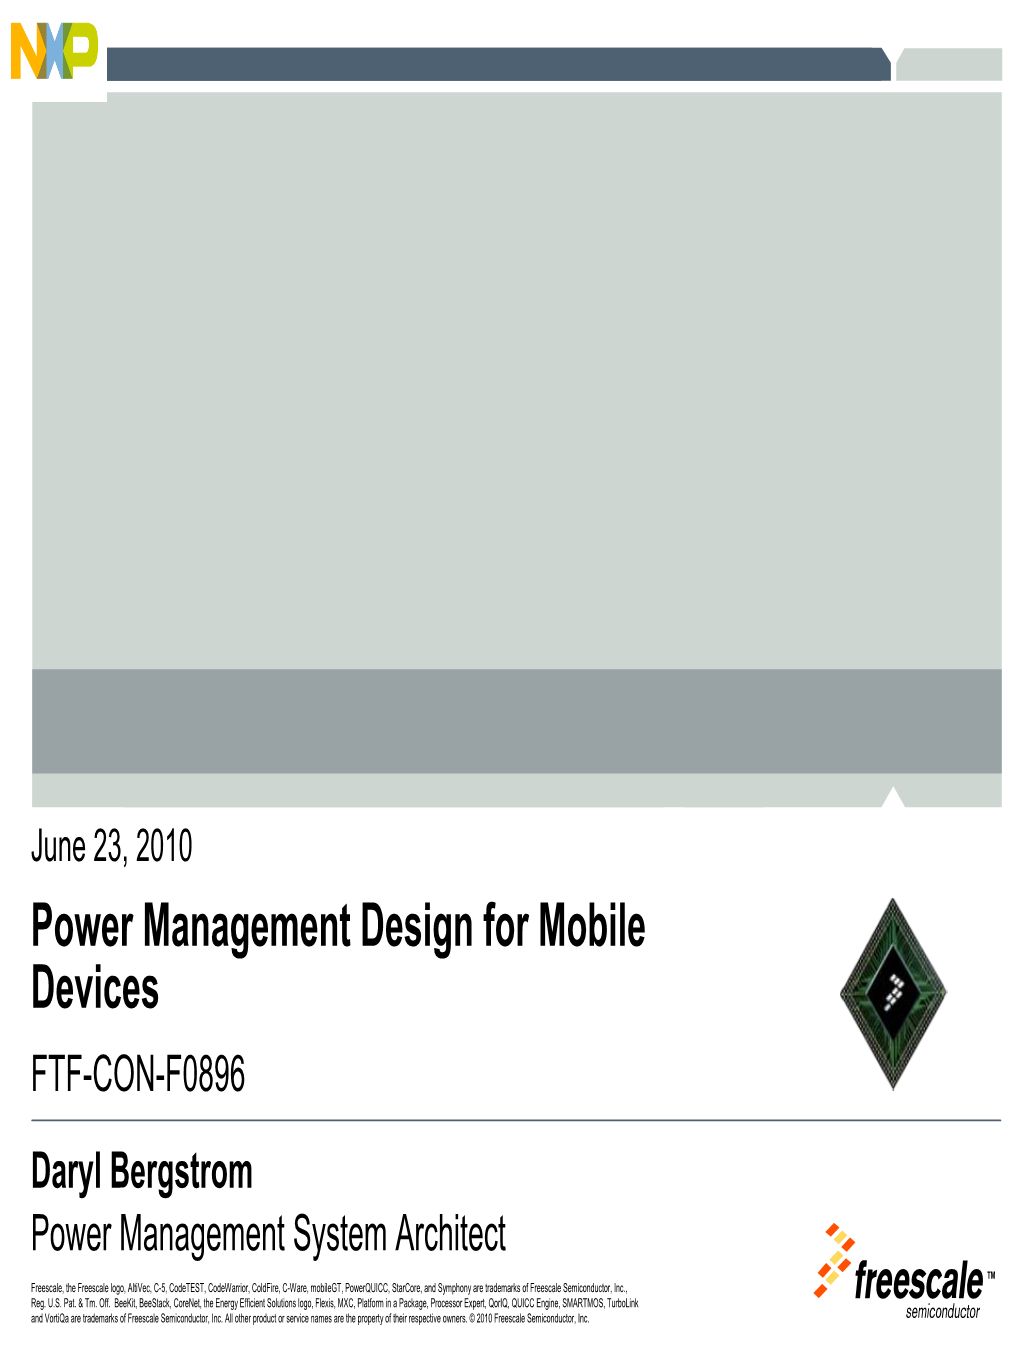 Power Management Design for Mobile Devices